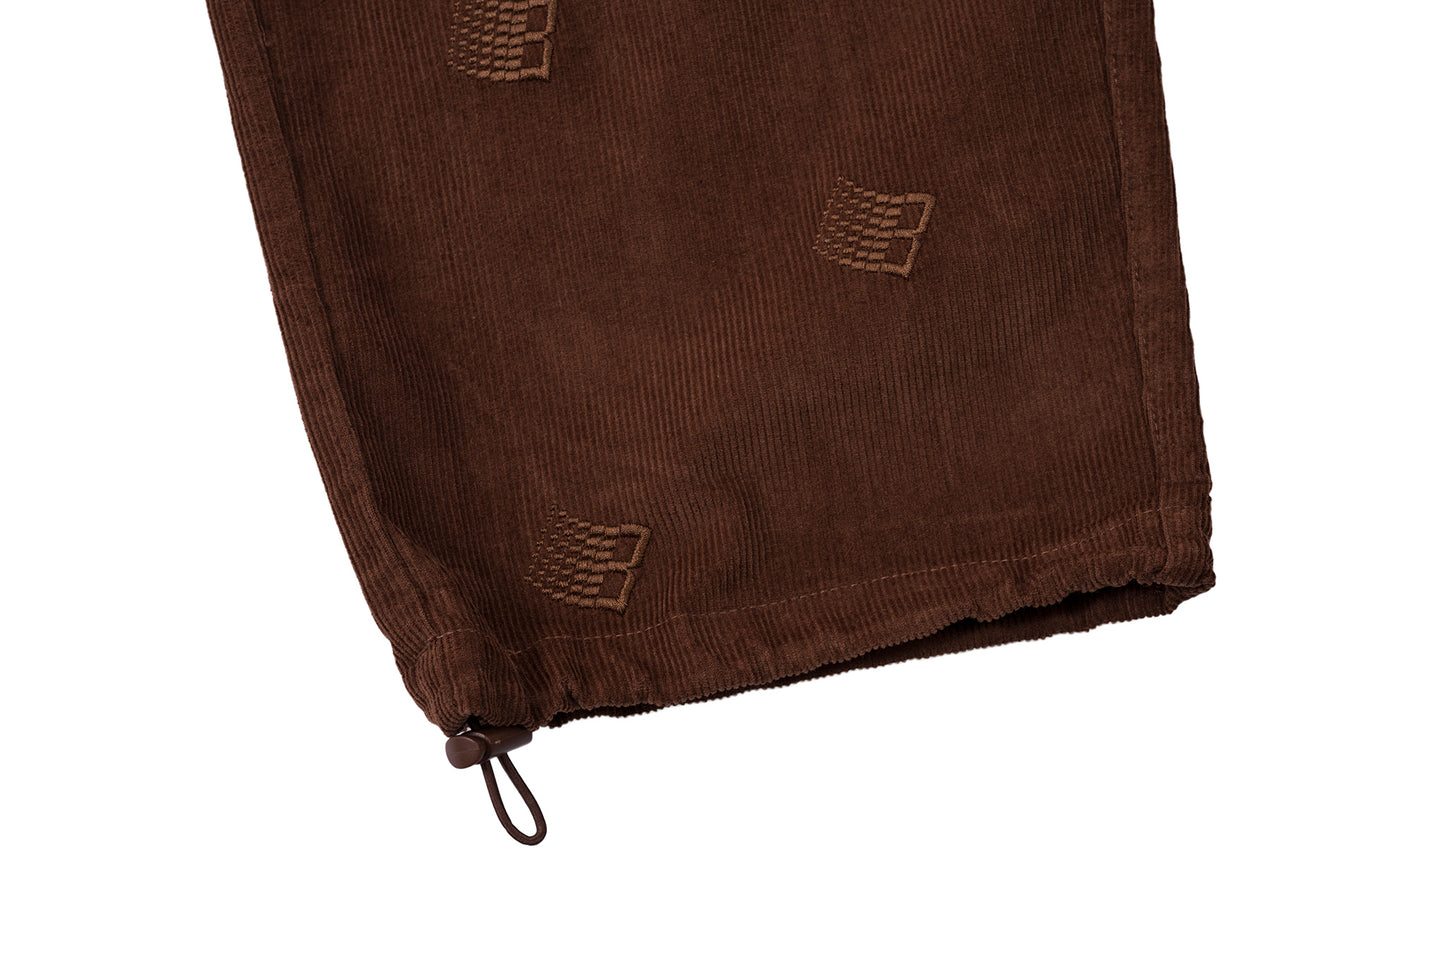 EMBROIDERED SYNCH CORDS BROWN